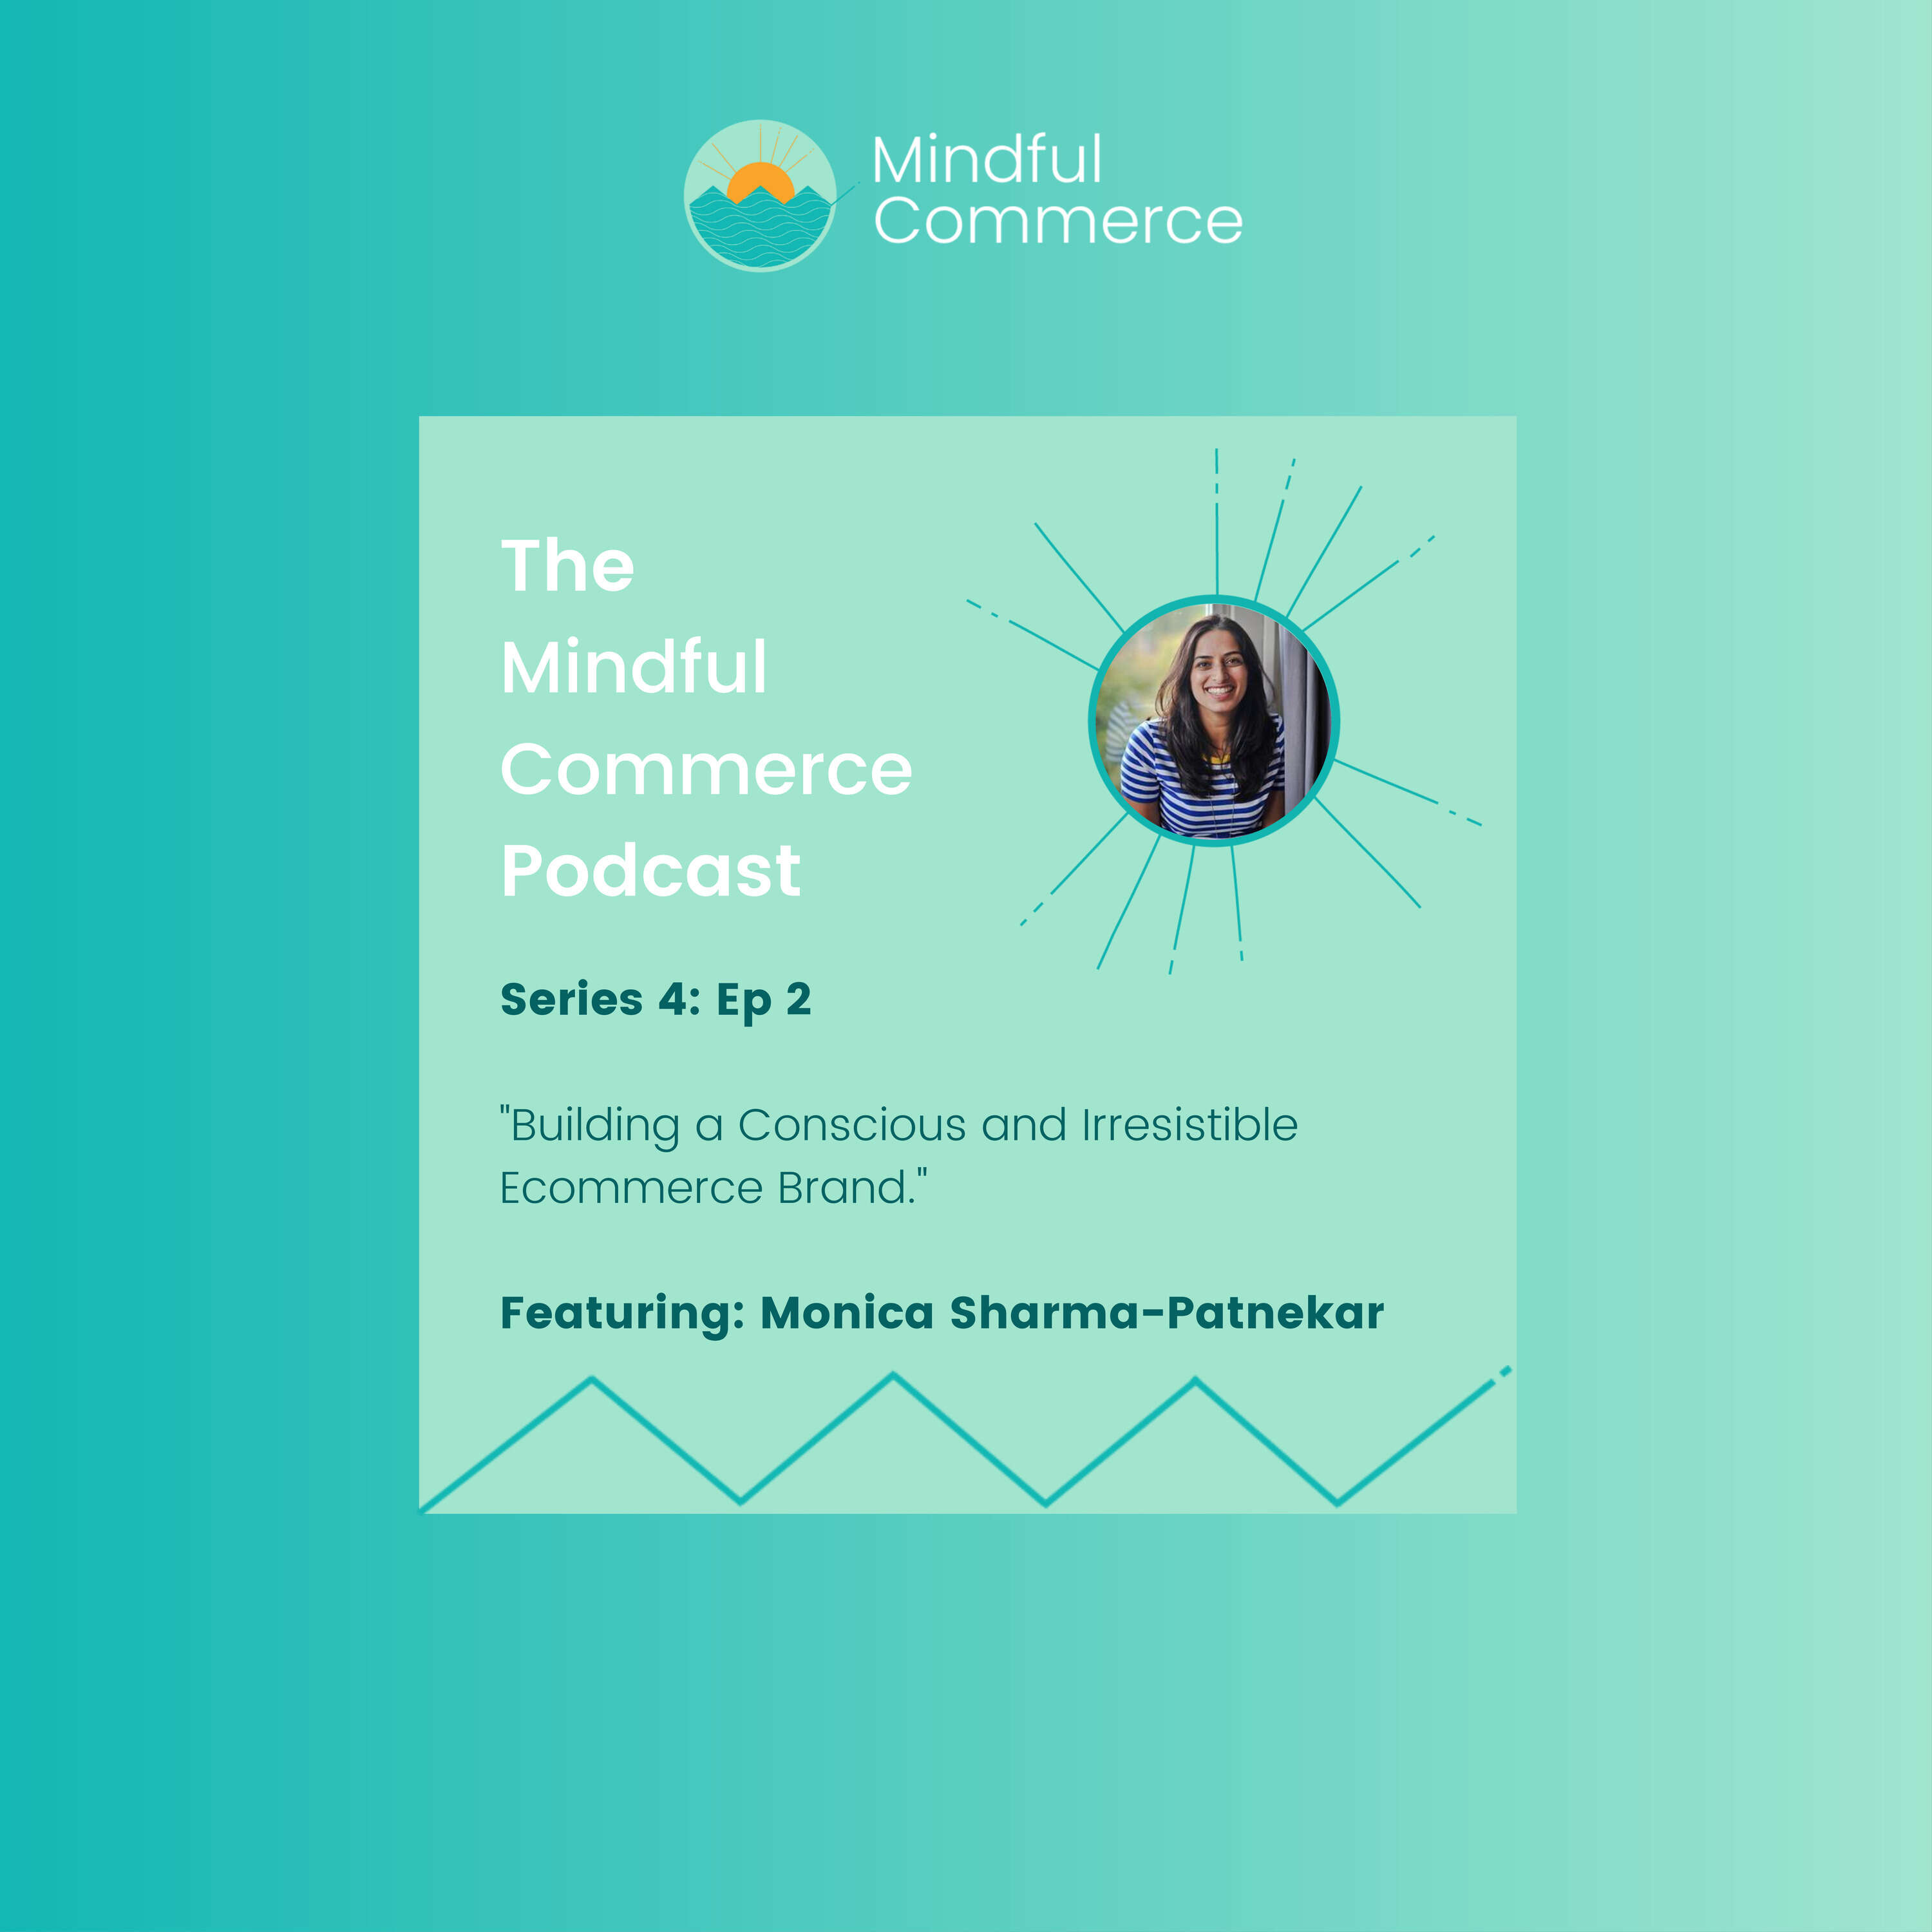 Building a Conscious & Irresistible Ecommerce Brand with Monica Sharma-Patnekar